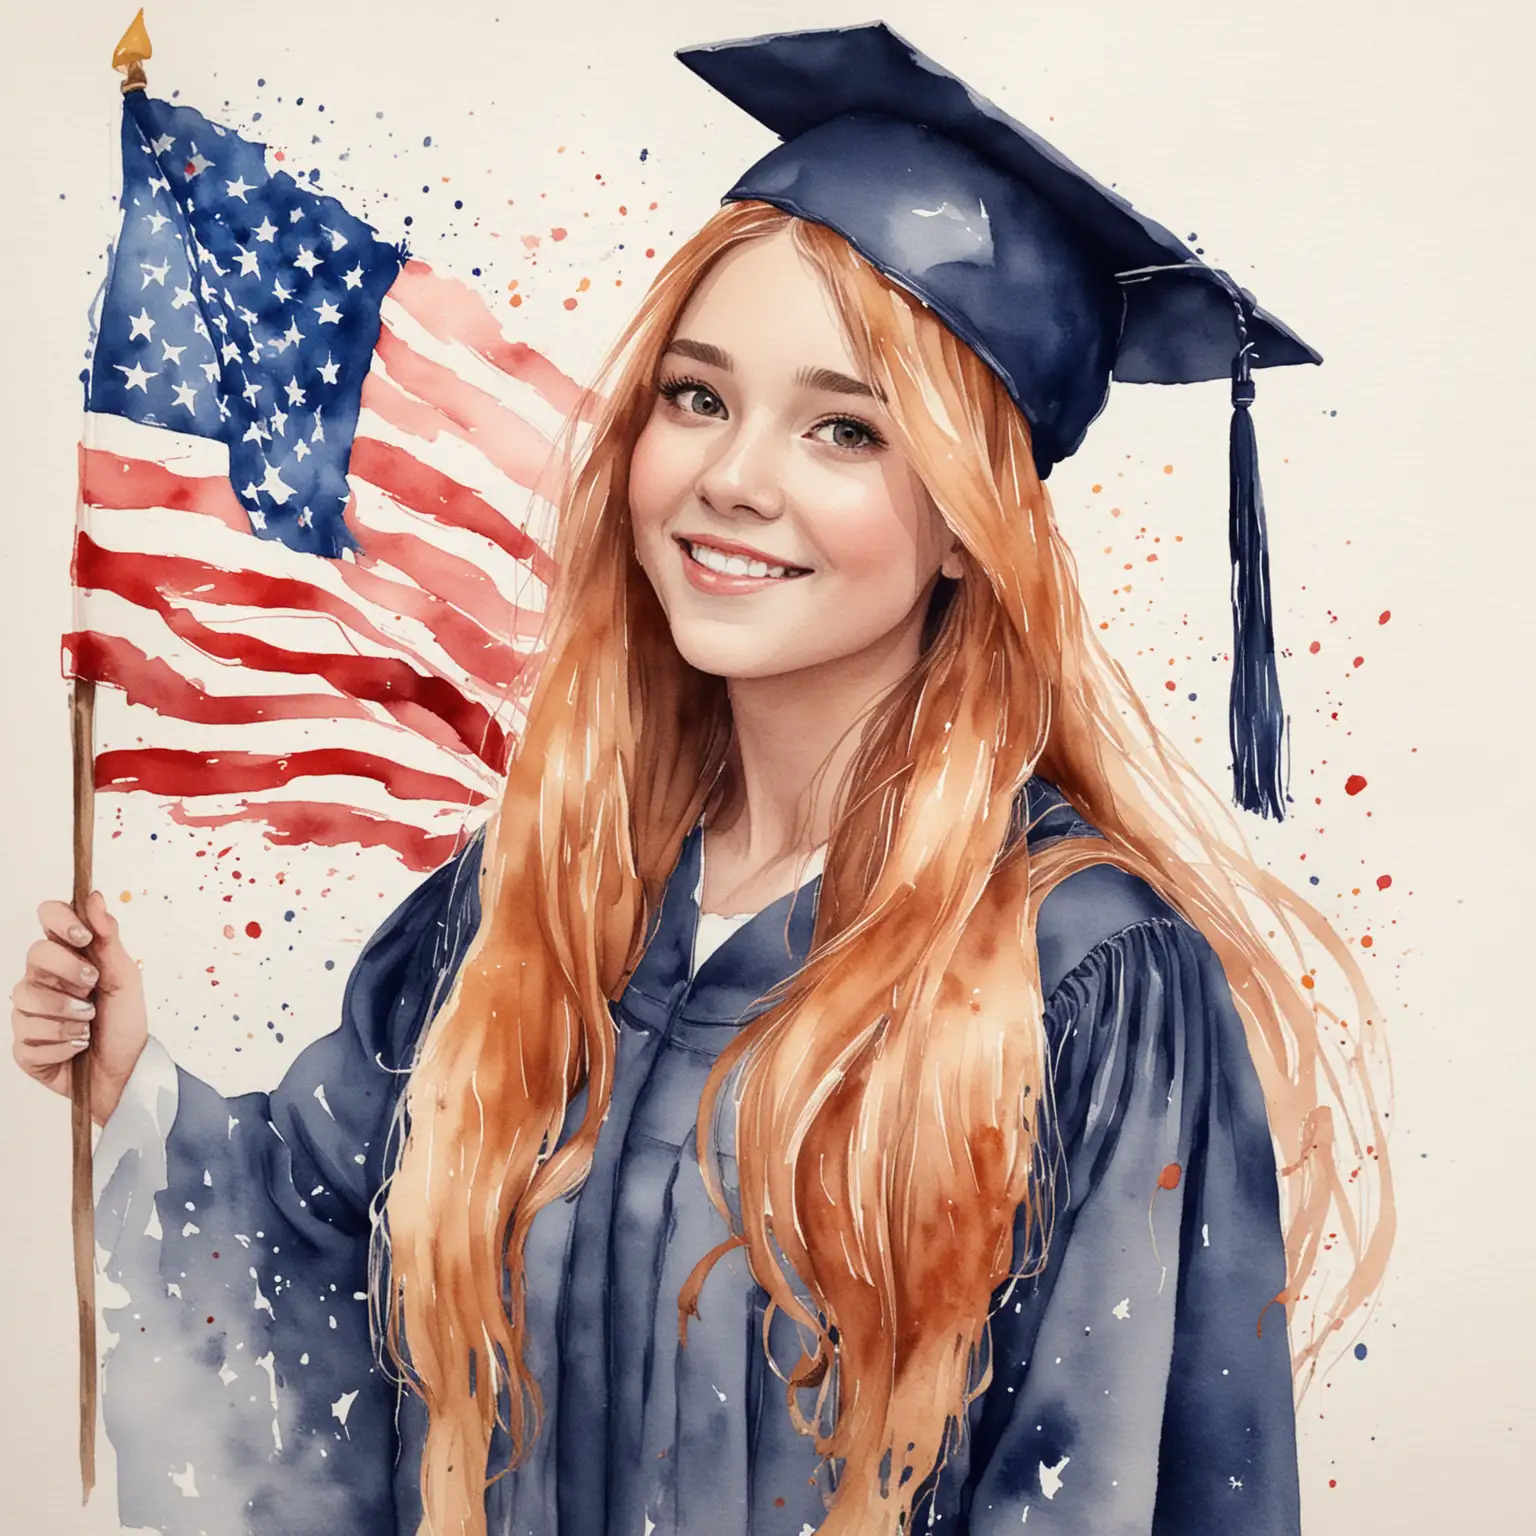 a girl with long hair graduating in the USA, with watercolor